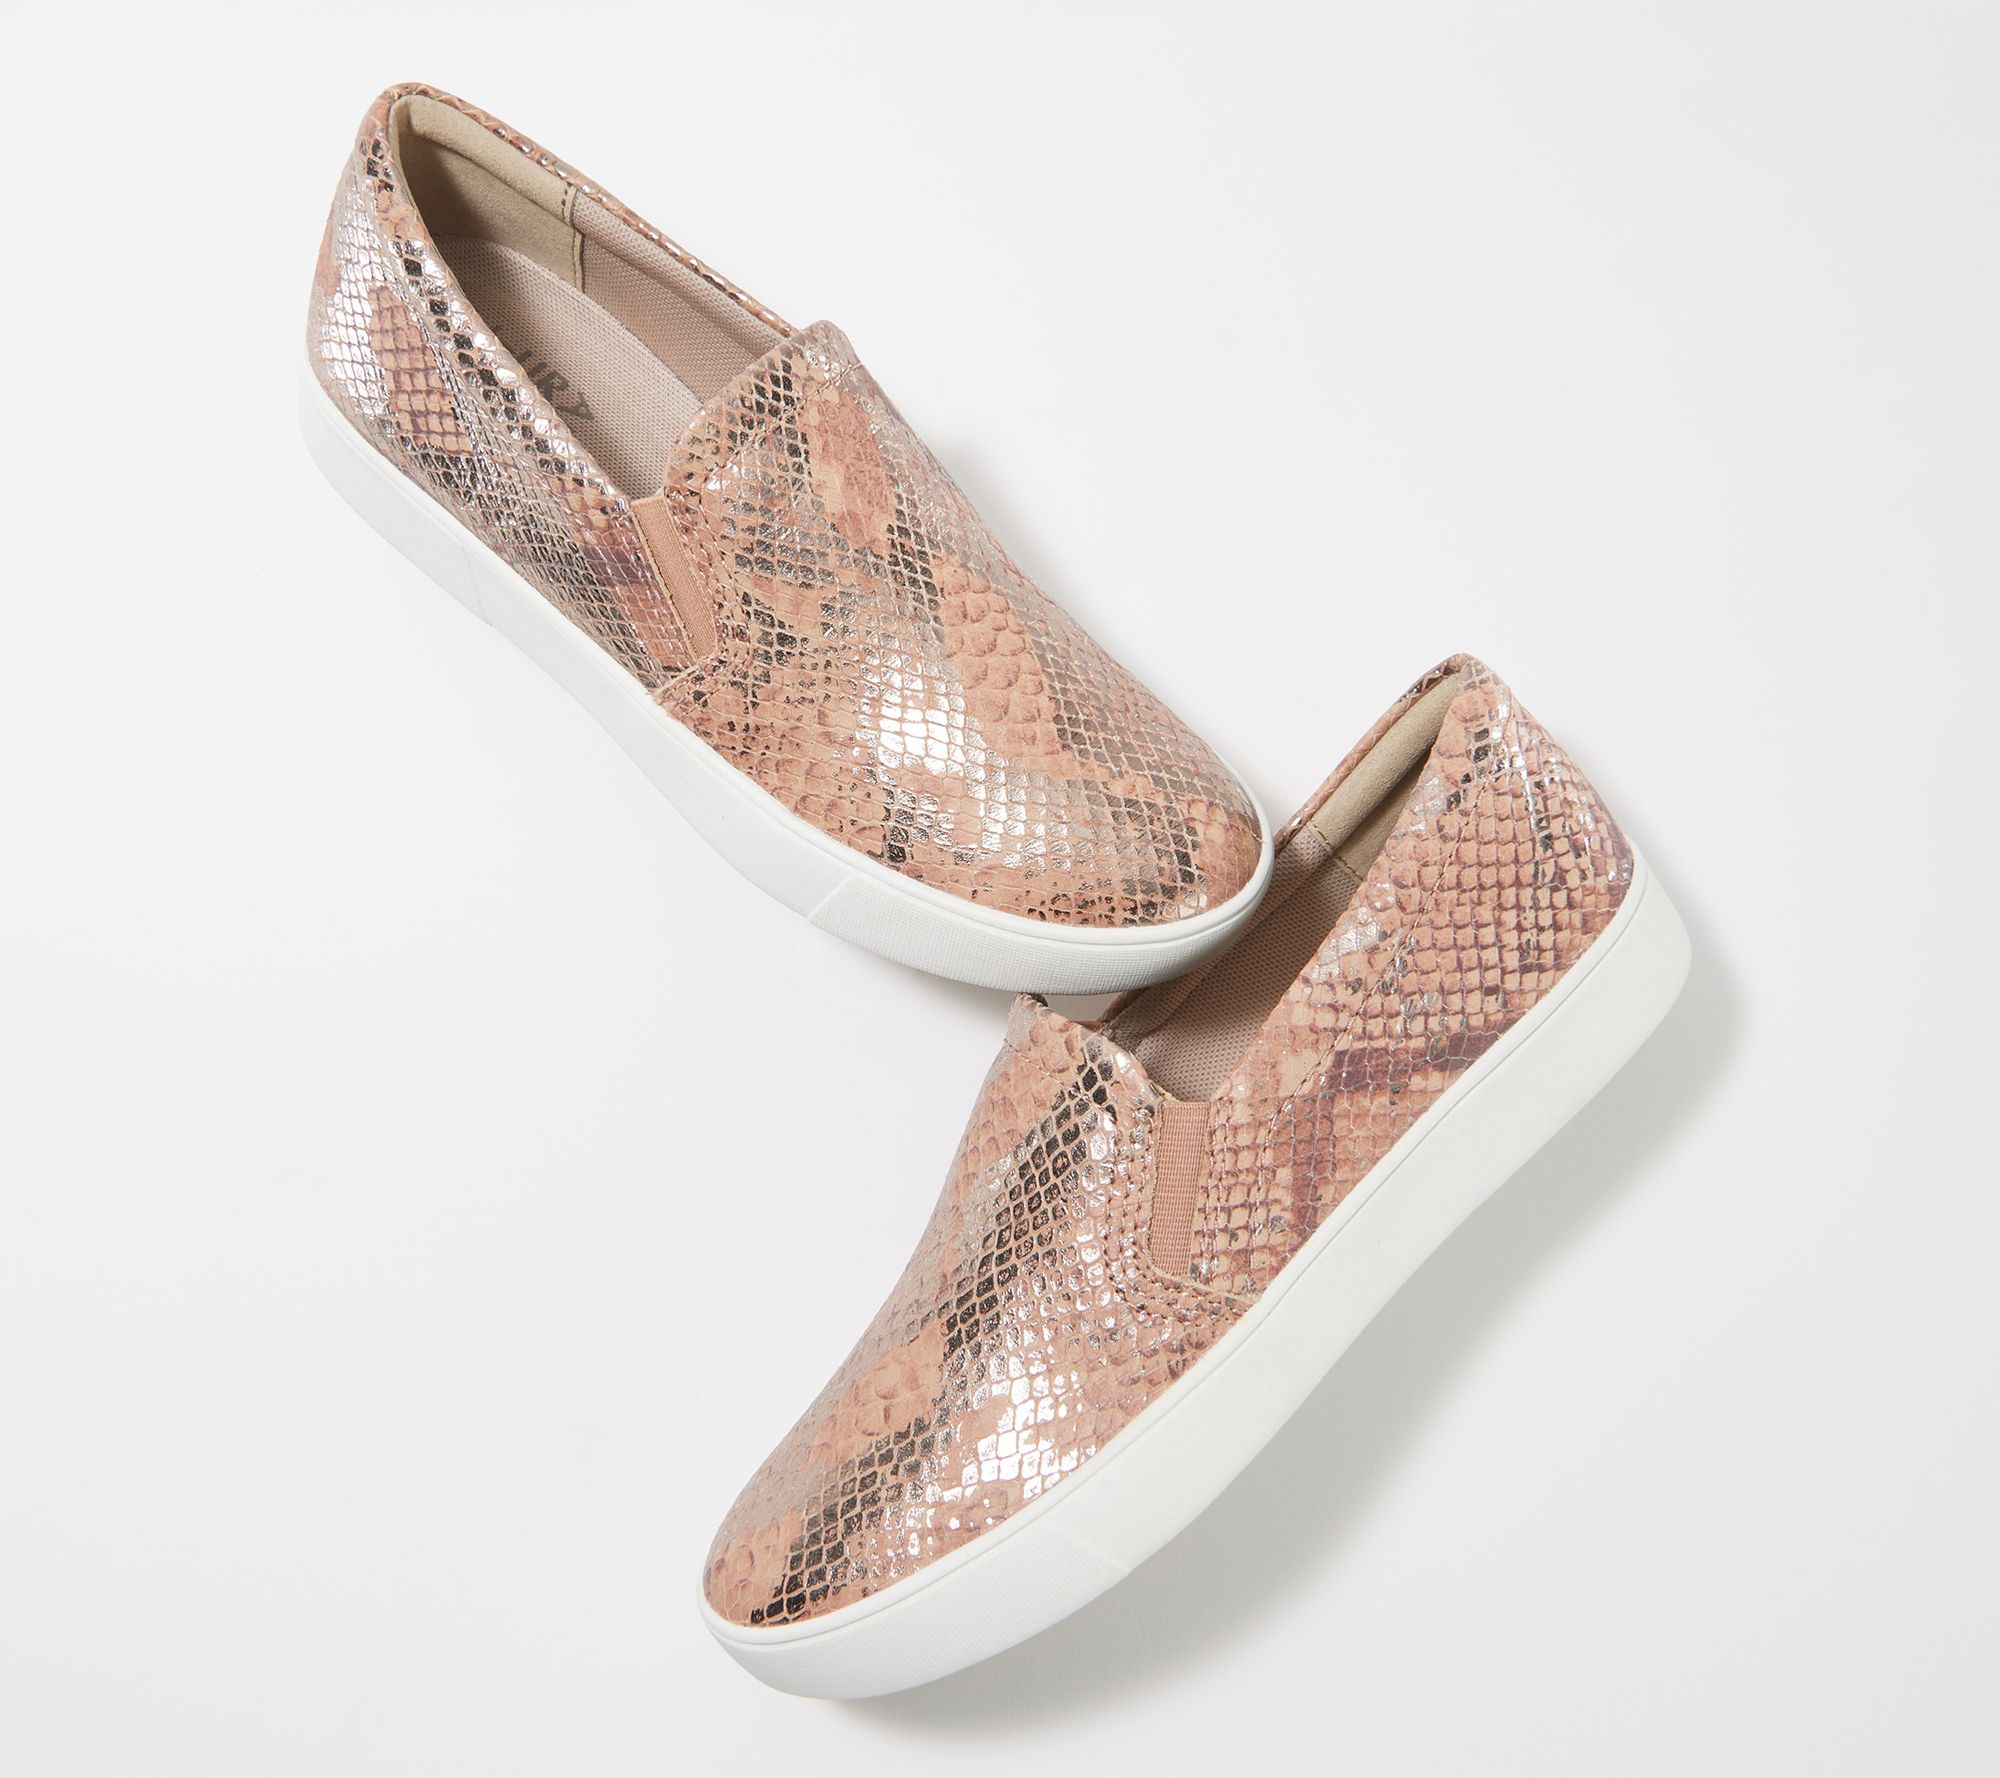 naturalizer leather slip on sneakers